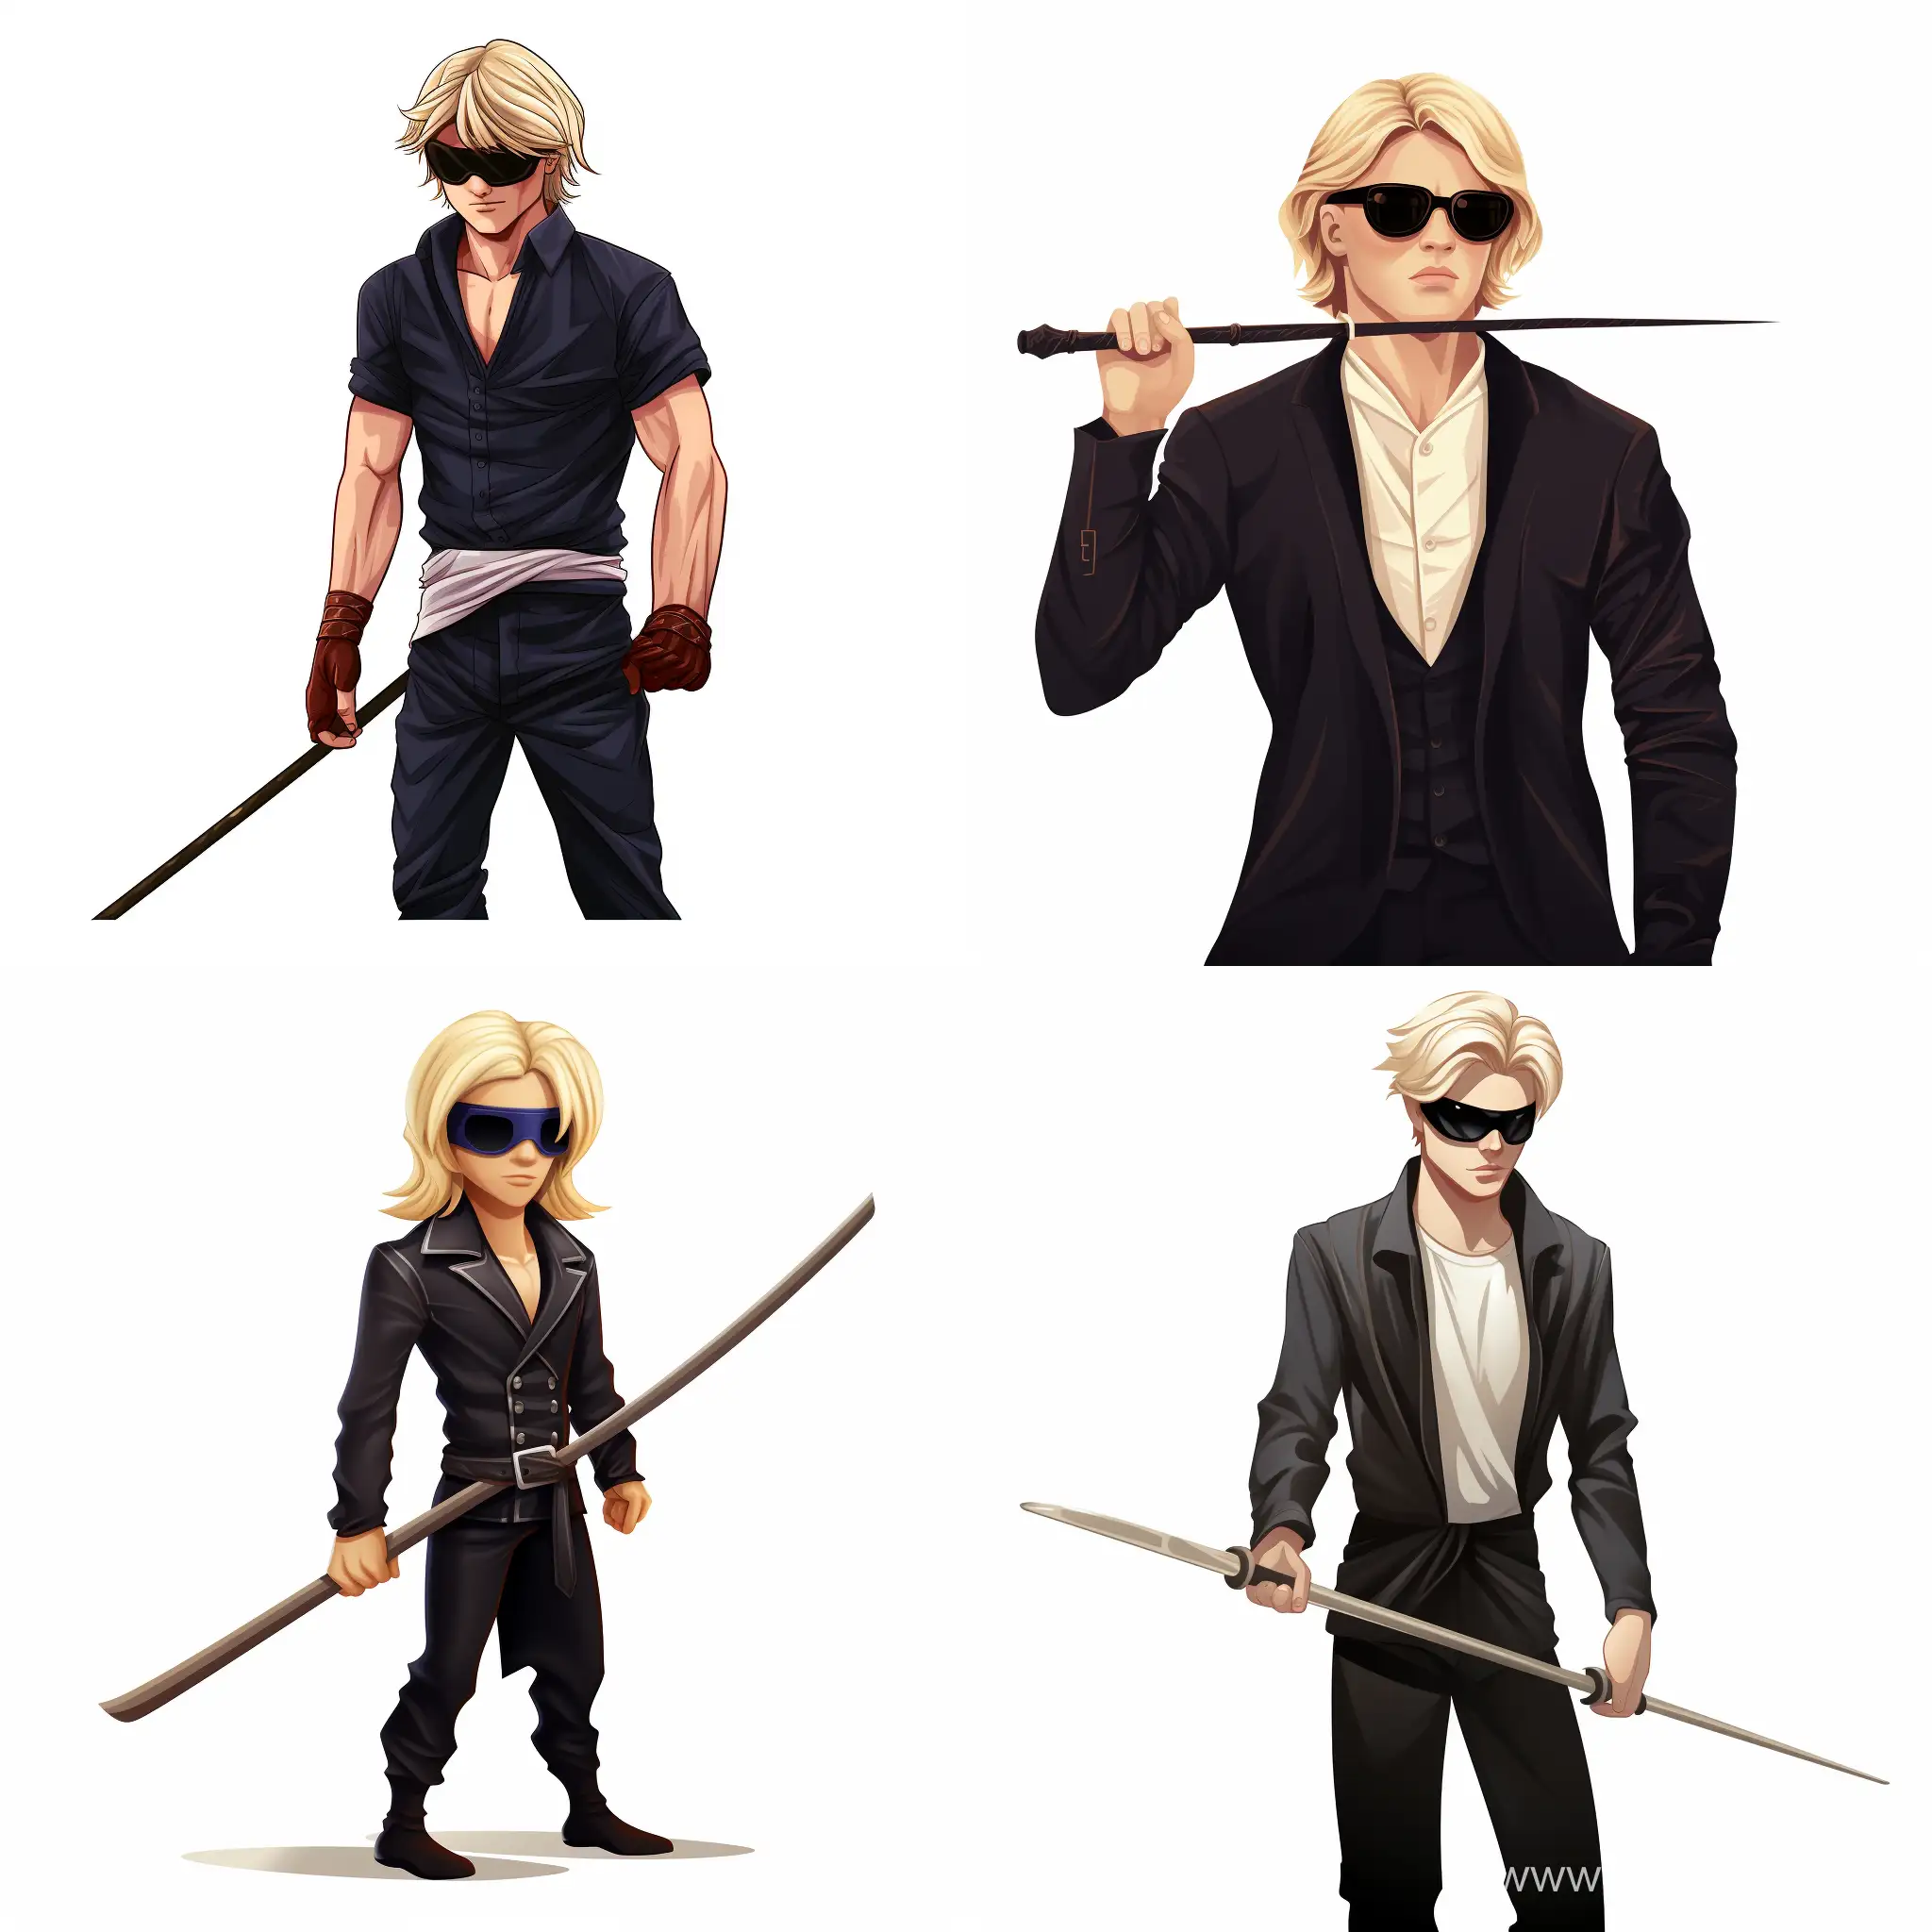 Alastor Grym, resembling Brandon Gleeson, blond, shoulder-length hair, full, wearing a blindfold with a prosthetic eye on the blindfold, holding a staff, on a white background, cartoon style, illustration